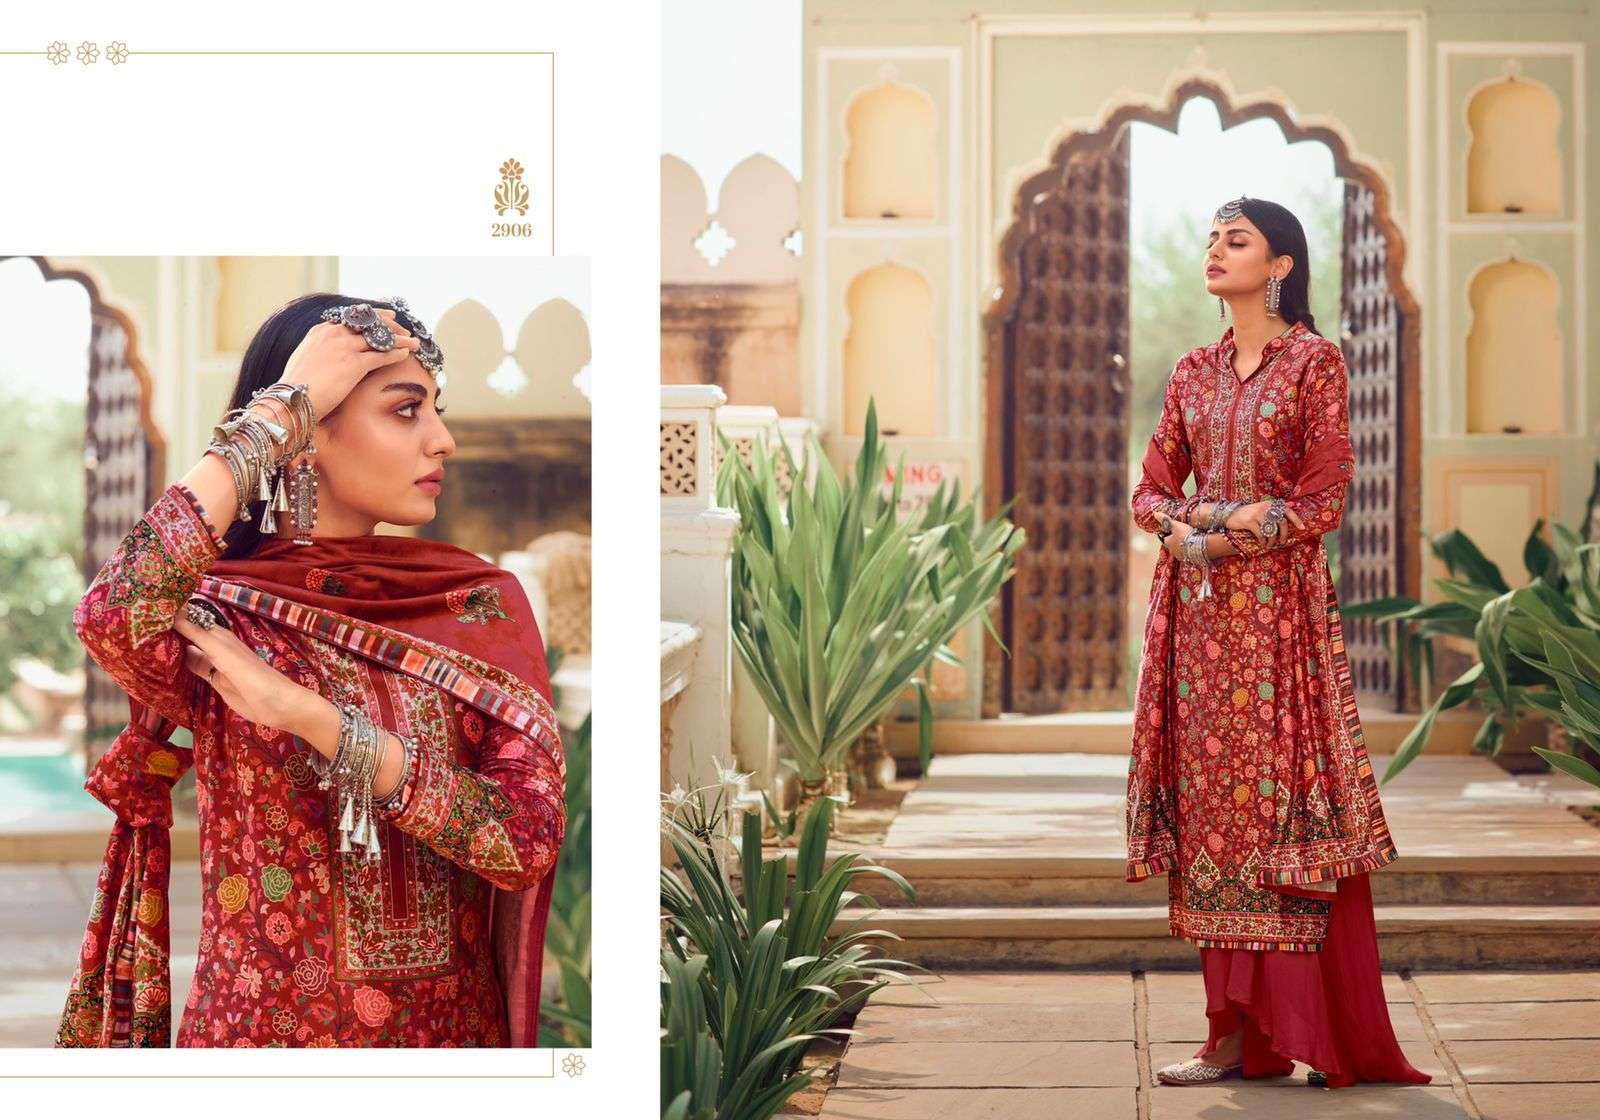 VELVET VOL-4 BY CHARMY 2901 TO 2908 SERIES BEAUTIFUL STYLISH SHARARA SUITS FANCY COLORFUL CASUAL WEAR & ETHNIC WEAR & READY TO WEAR VELVET DIGITAL PRINTED DRESSES AT WHOLESALE PRICE